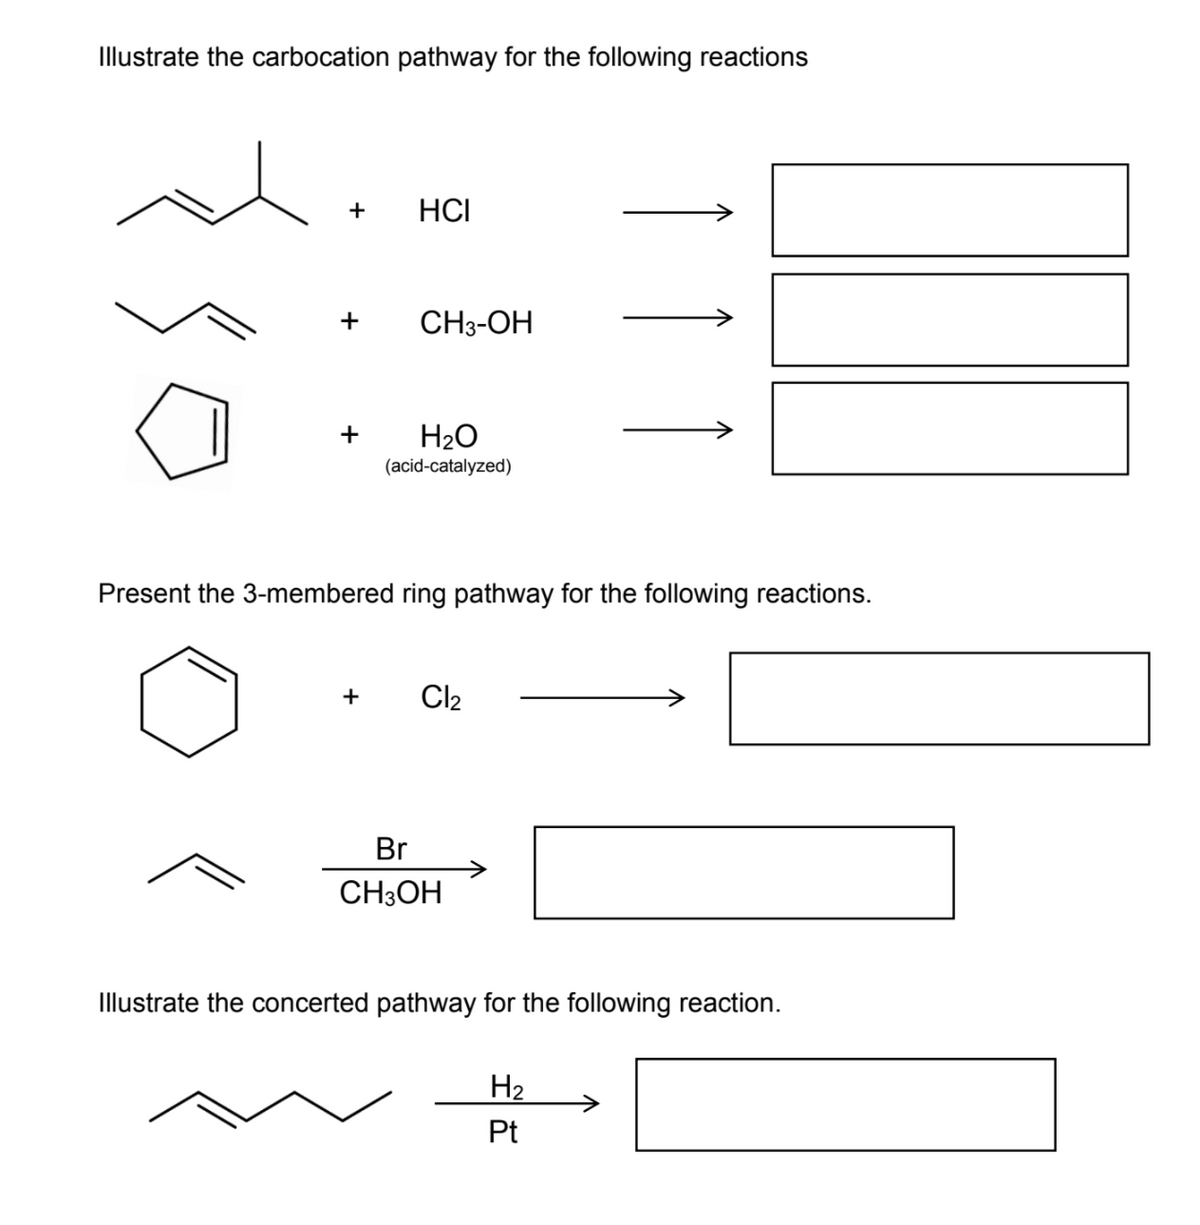 Illustrate the carbocation pathway for the following reactions
+
HCI
+
CH3-OH
H2O
(acid-catalyzed)
Present the 3-membered ring pathway for the following reactions.
+
Cl2
Br
->
CH3OH
Illustrate the concerted pathway for the following reaction.
H2
->
Pt
